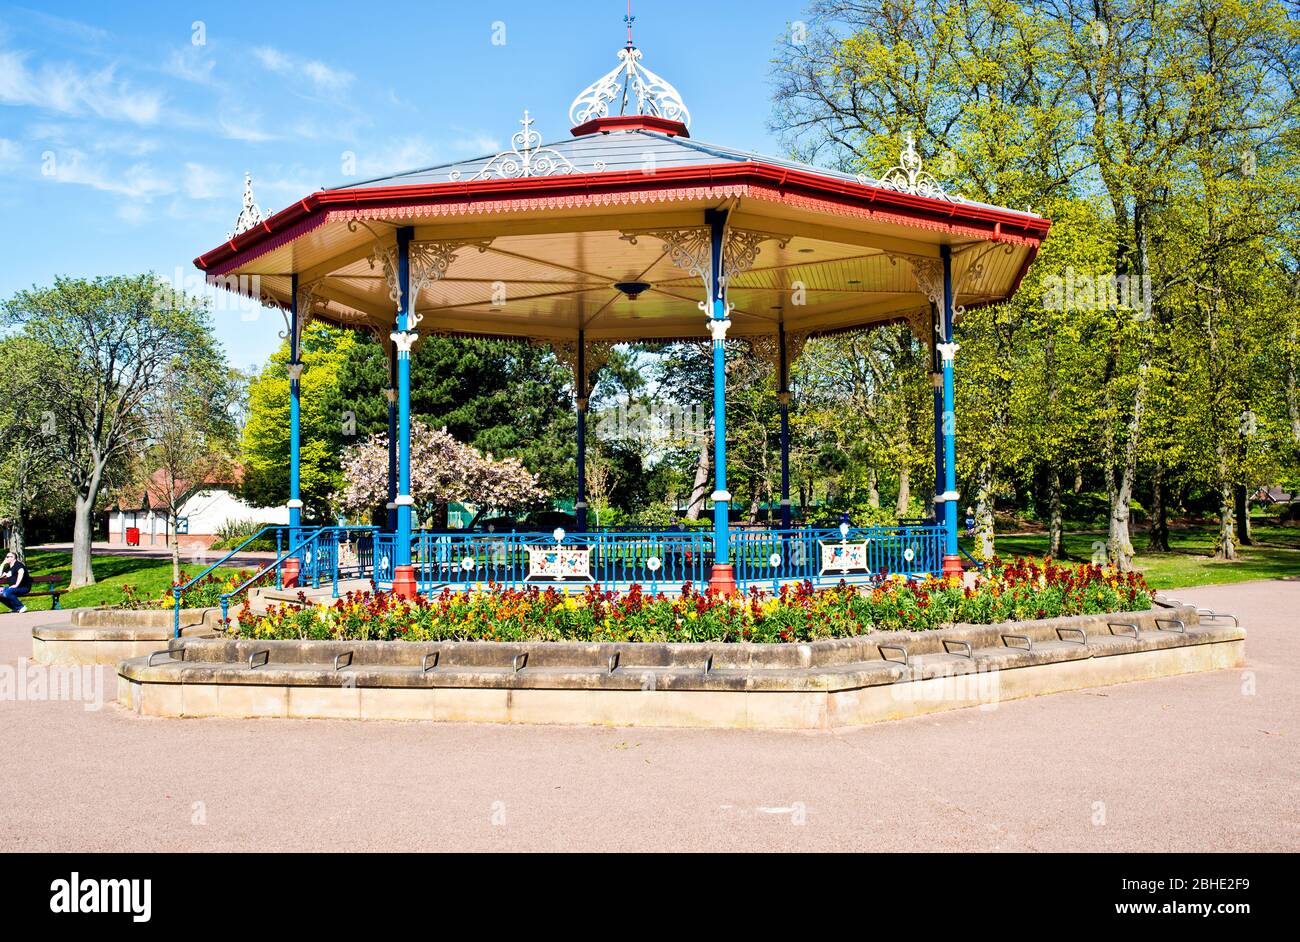 Bandstand, Ropner Park, Stockton on Tees, Cleveland, England Stock Photo